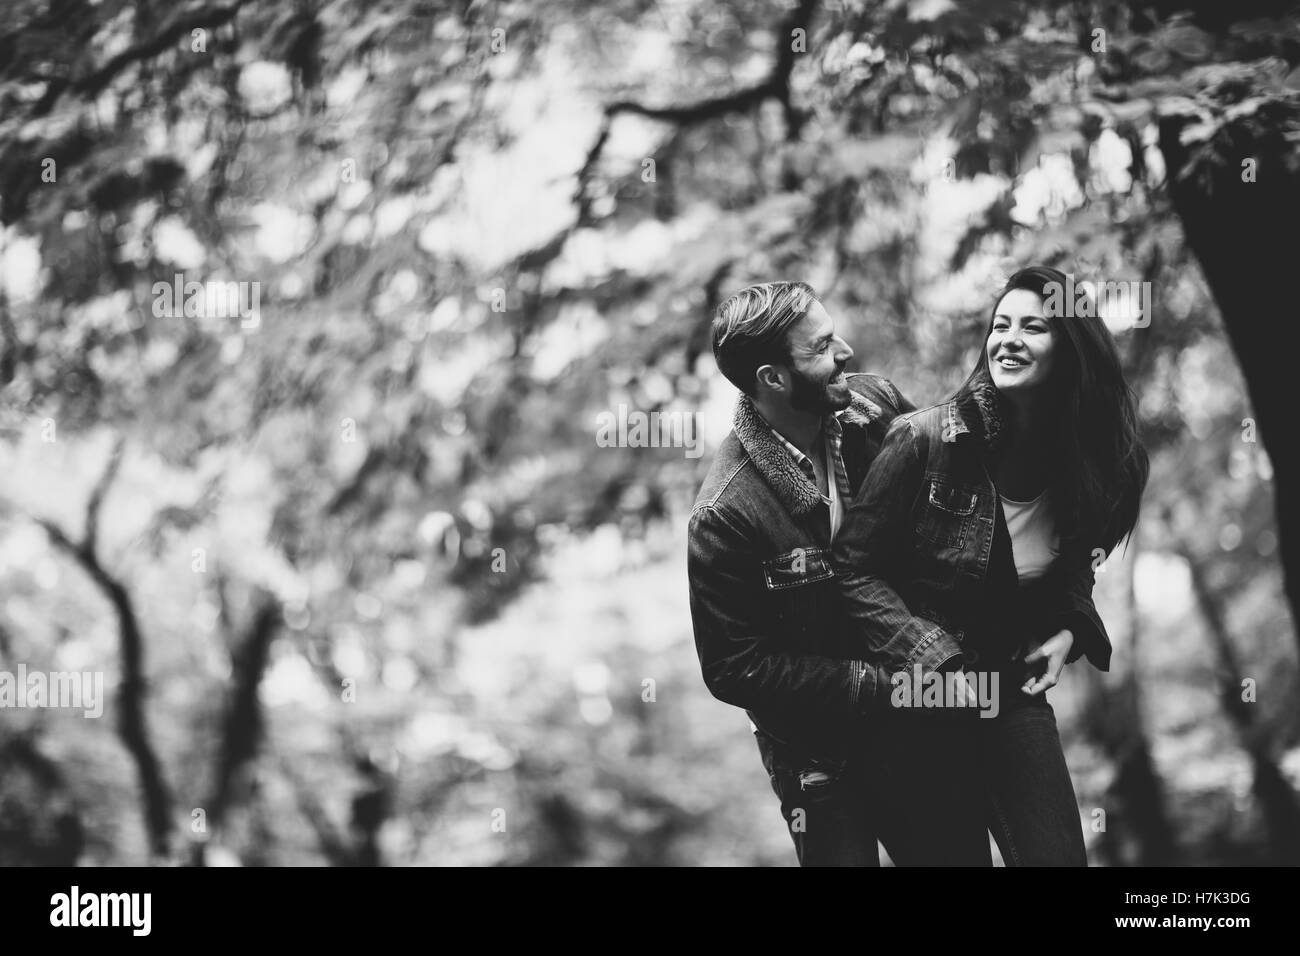 Young couple having fun in the autumn park Banque D'Images